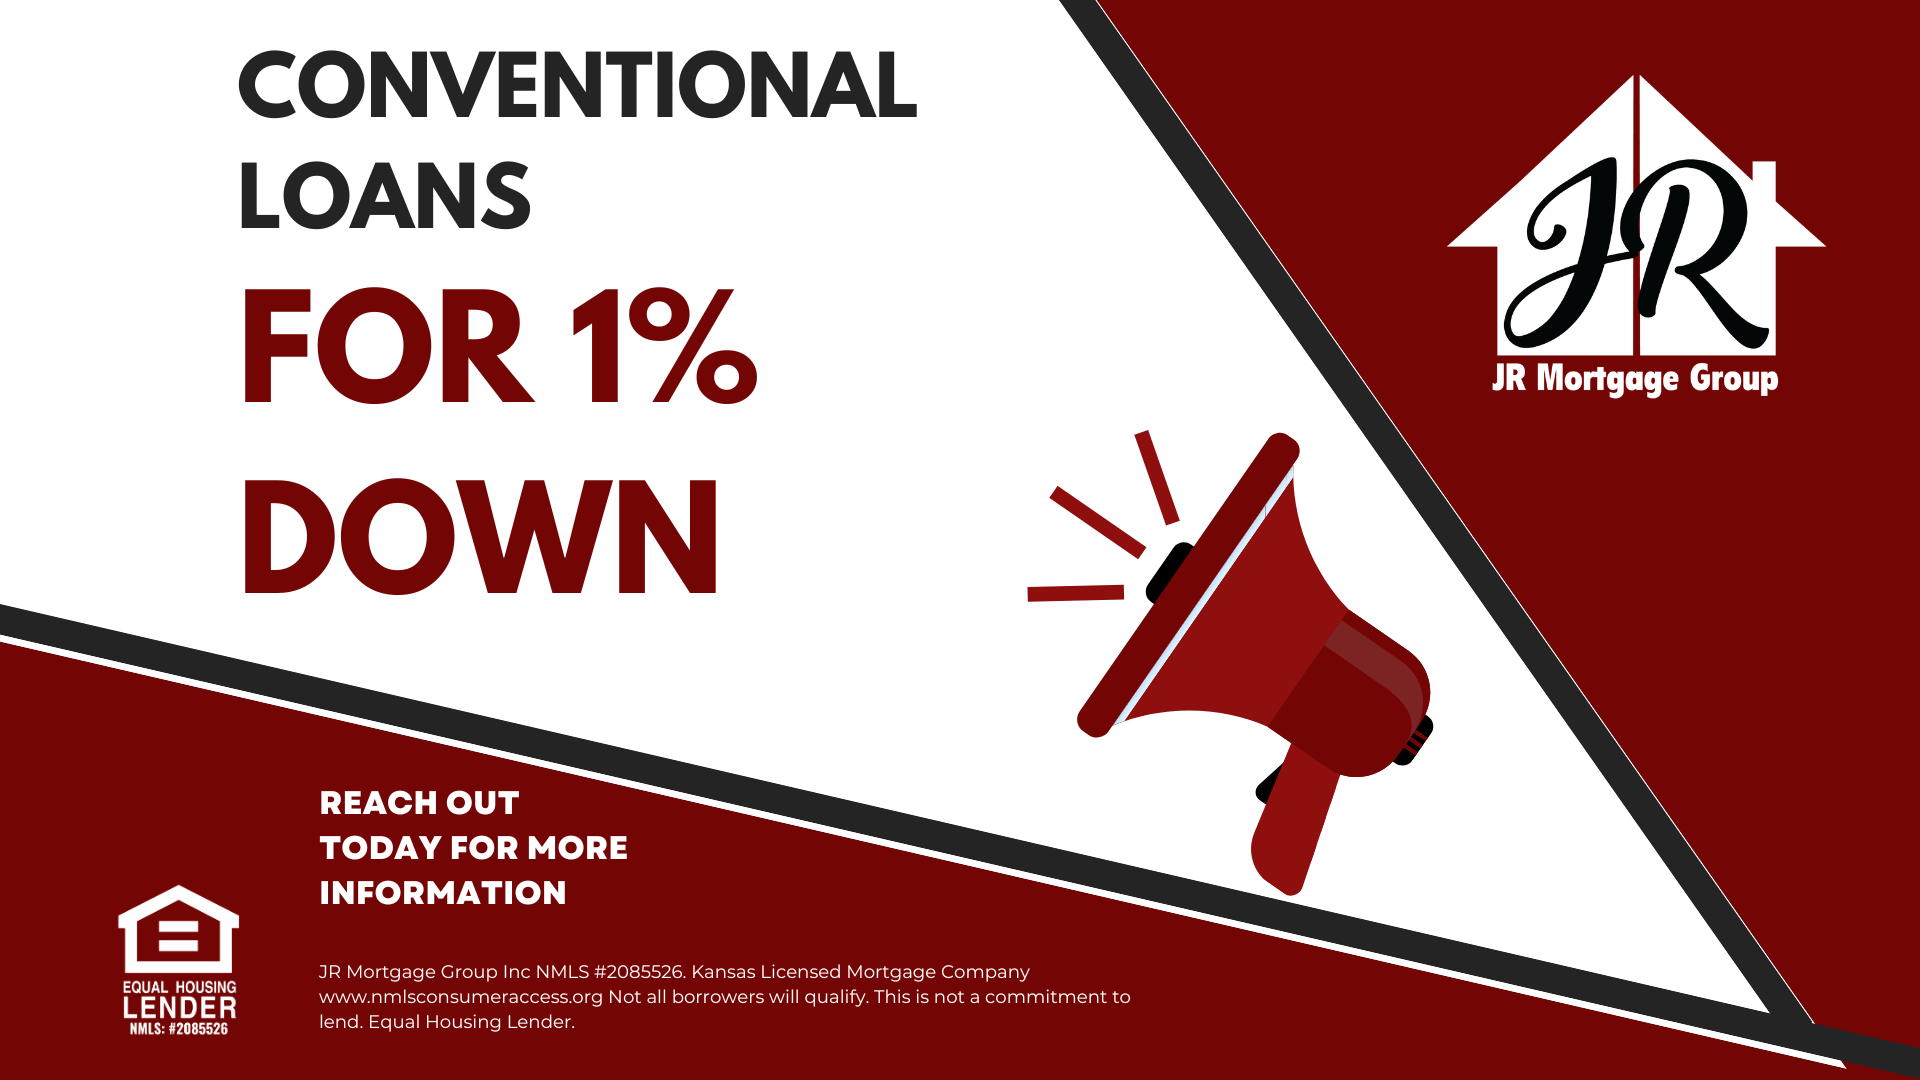 Get a Conventional Loan for 1% Down Through JR Mor...